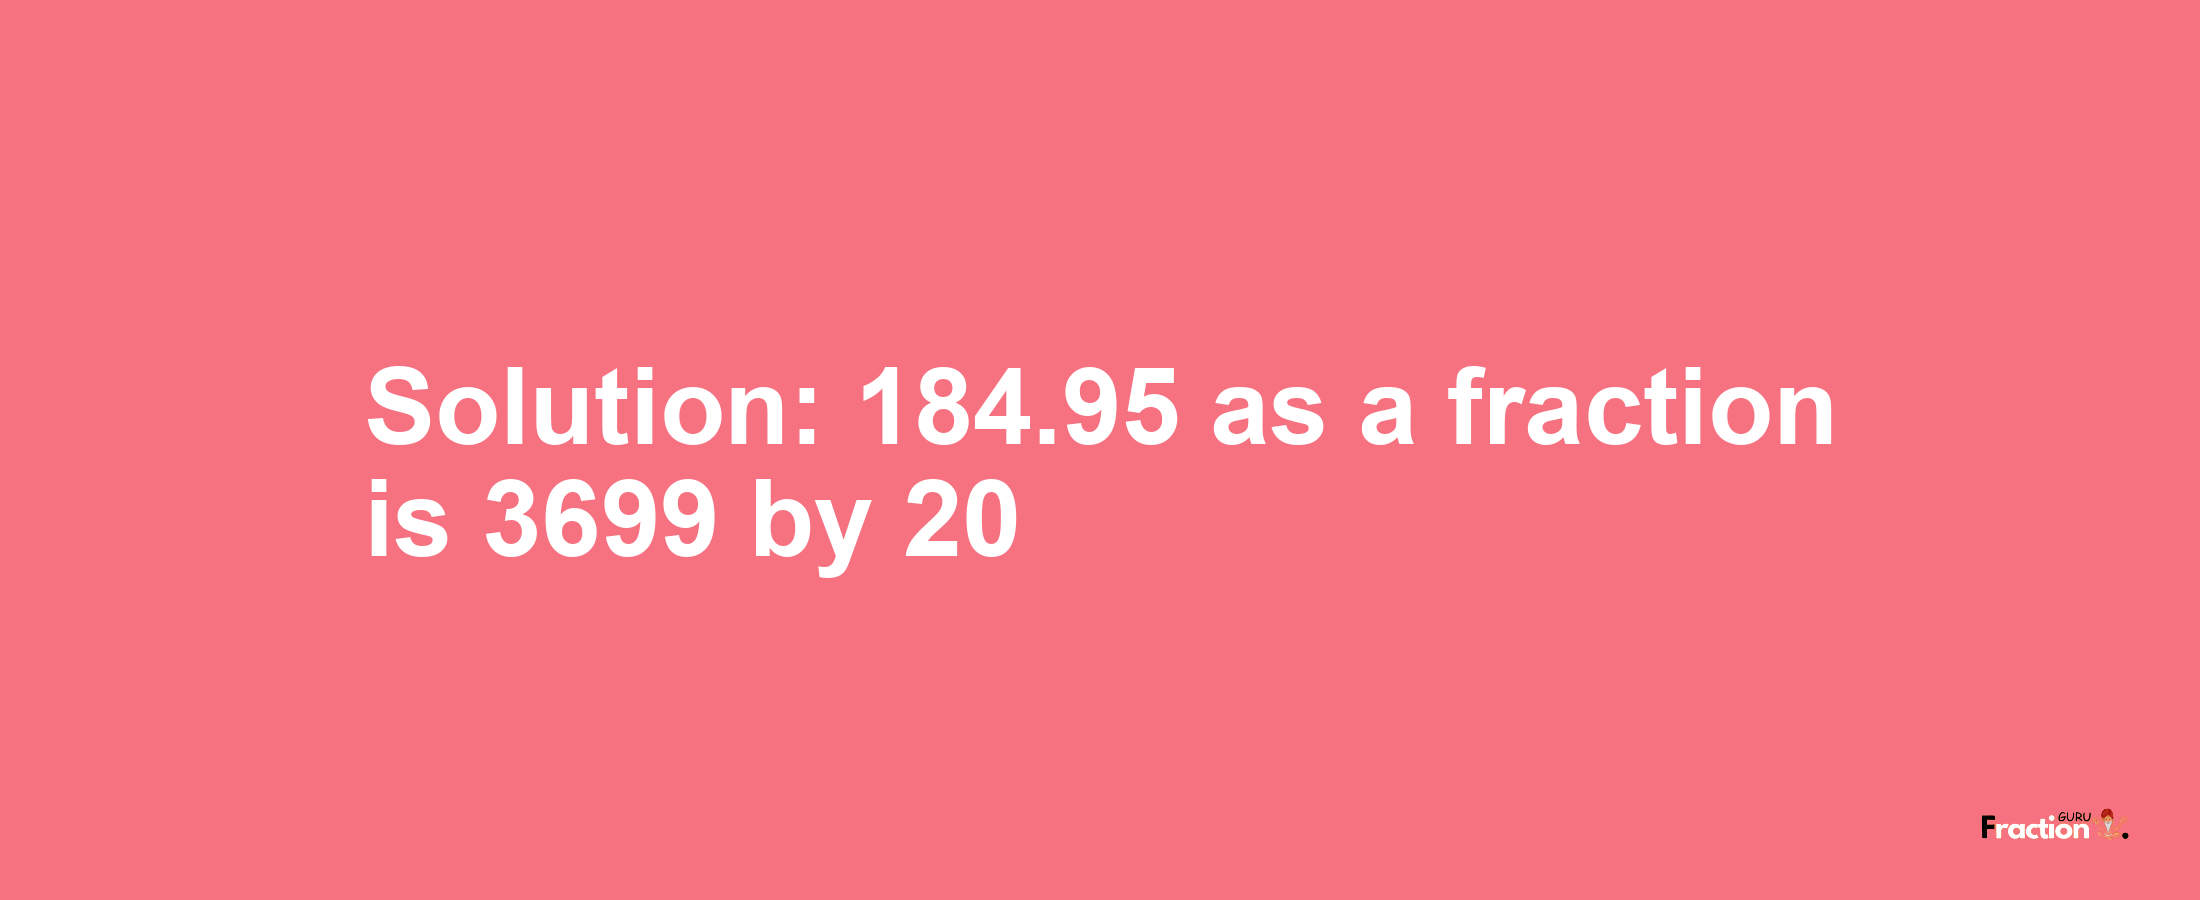 Solution:184.95 as a fraction is 3699/20